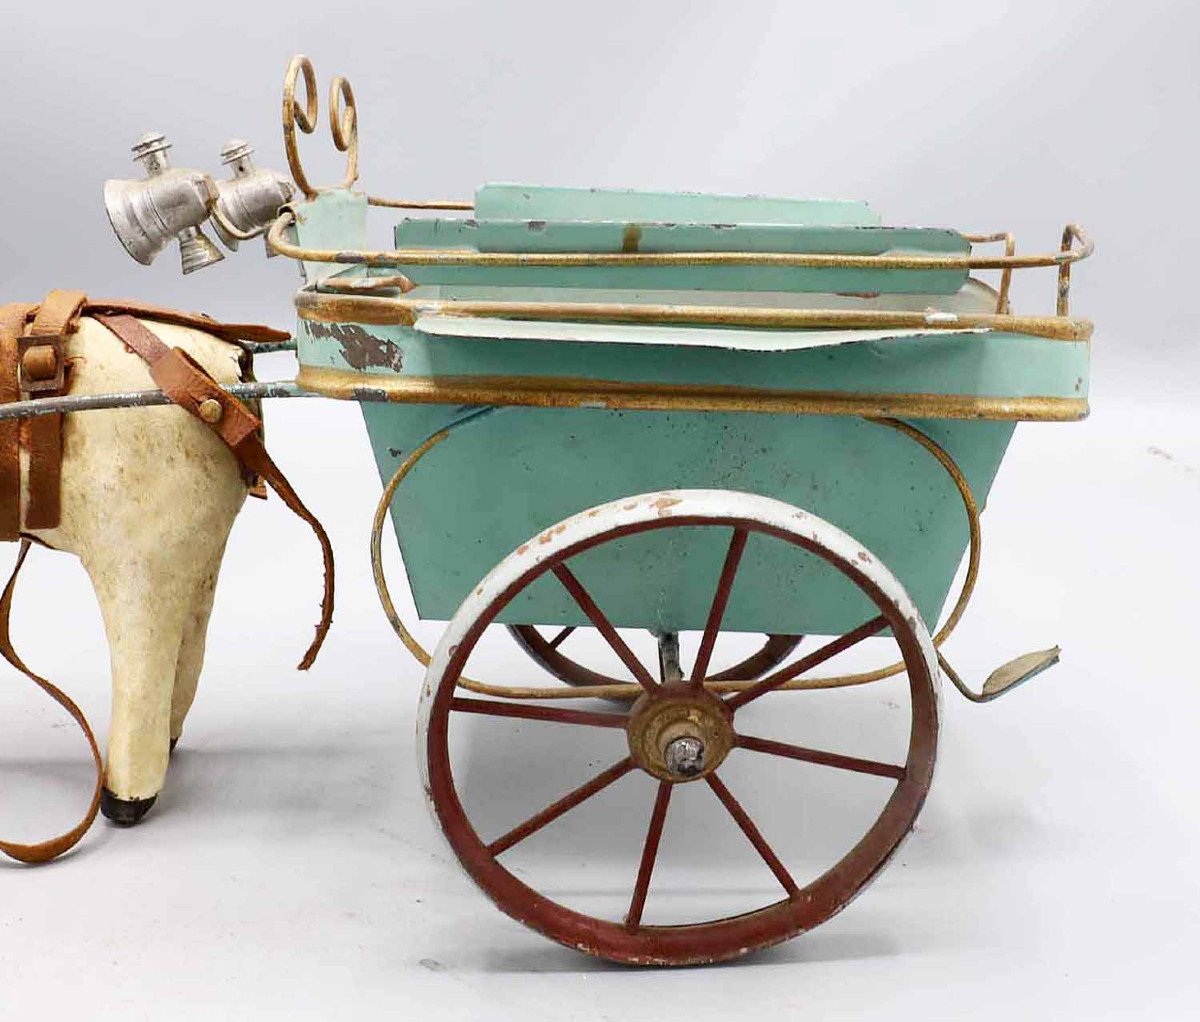 French Toy Carriole Around 1880 - 1900-photo-6